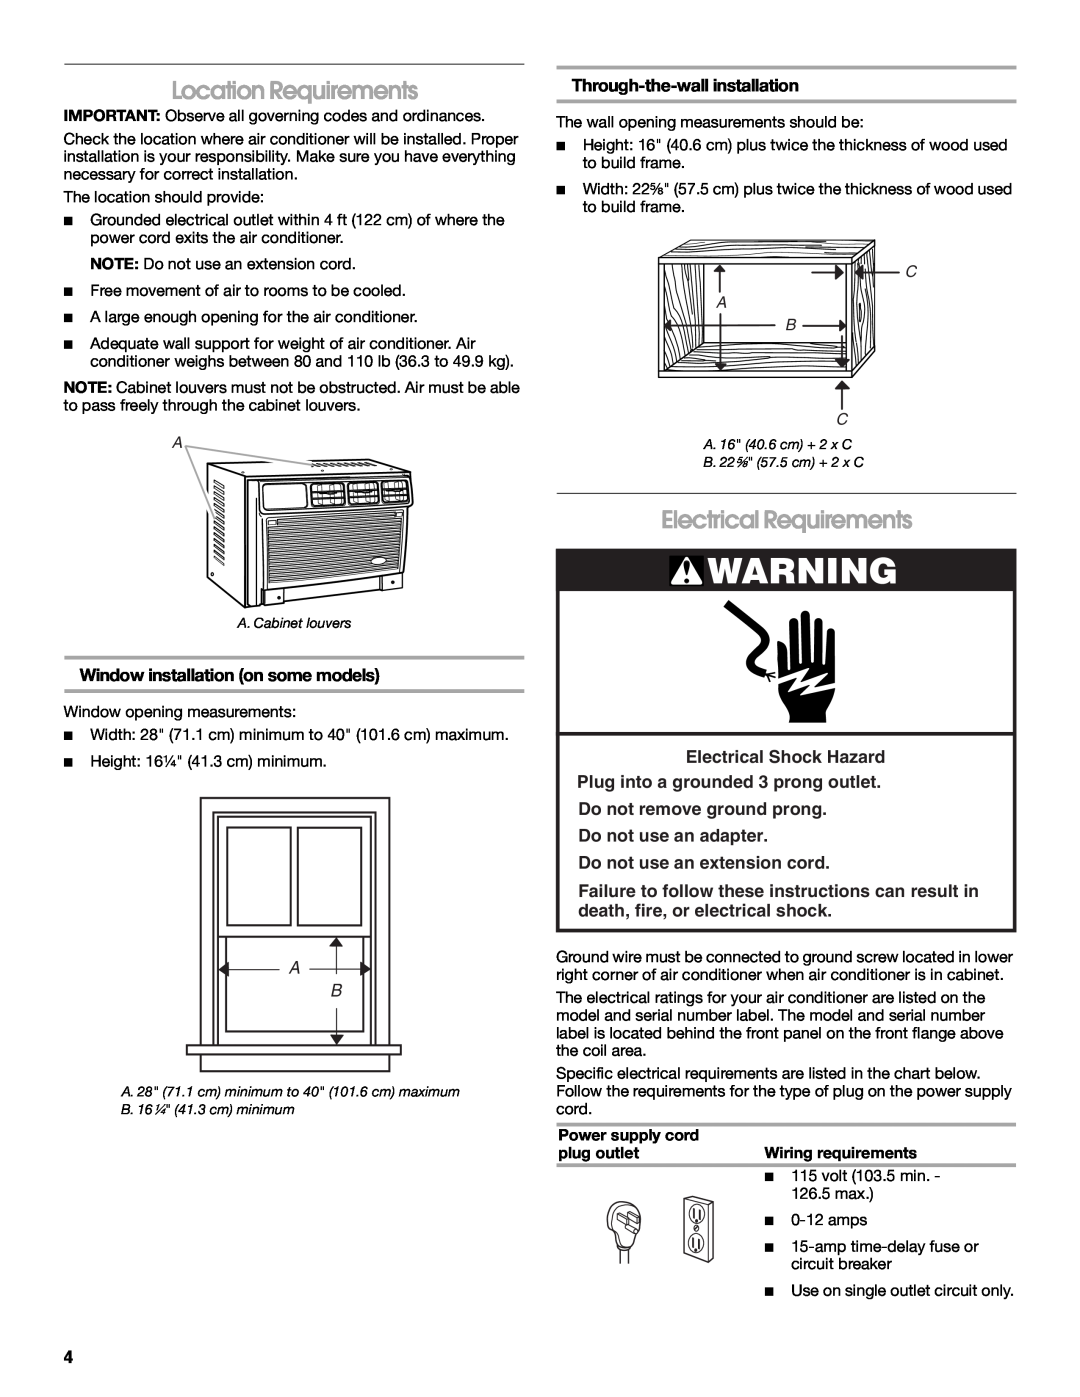 Whirlpool ACE082XP1 manual Location Requirements, Electrical Requirements, Window installation on some models 